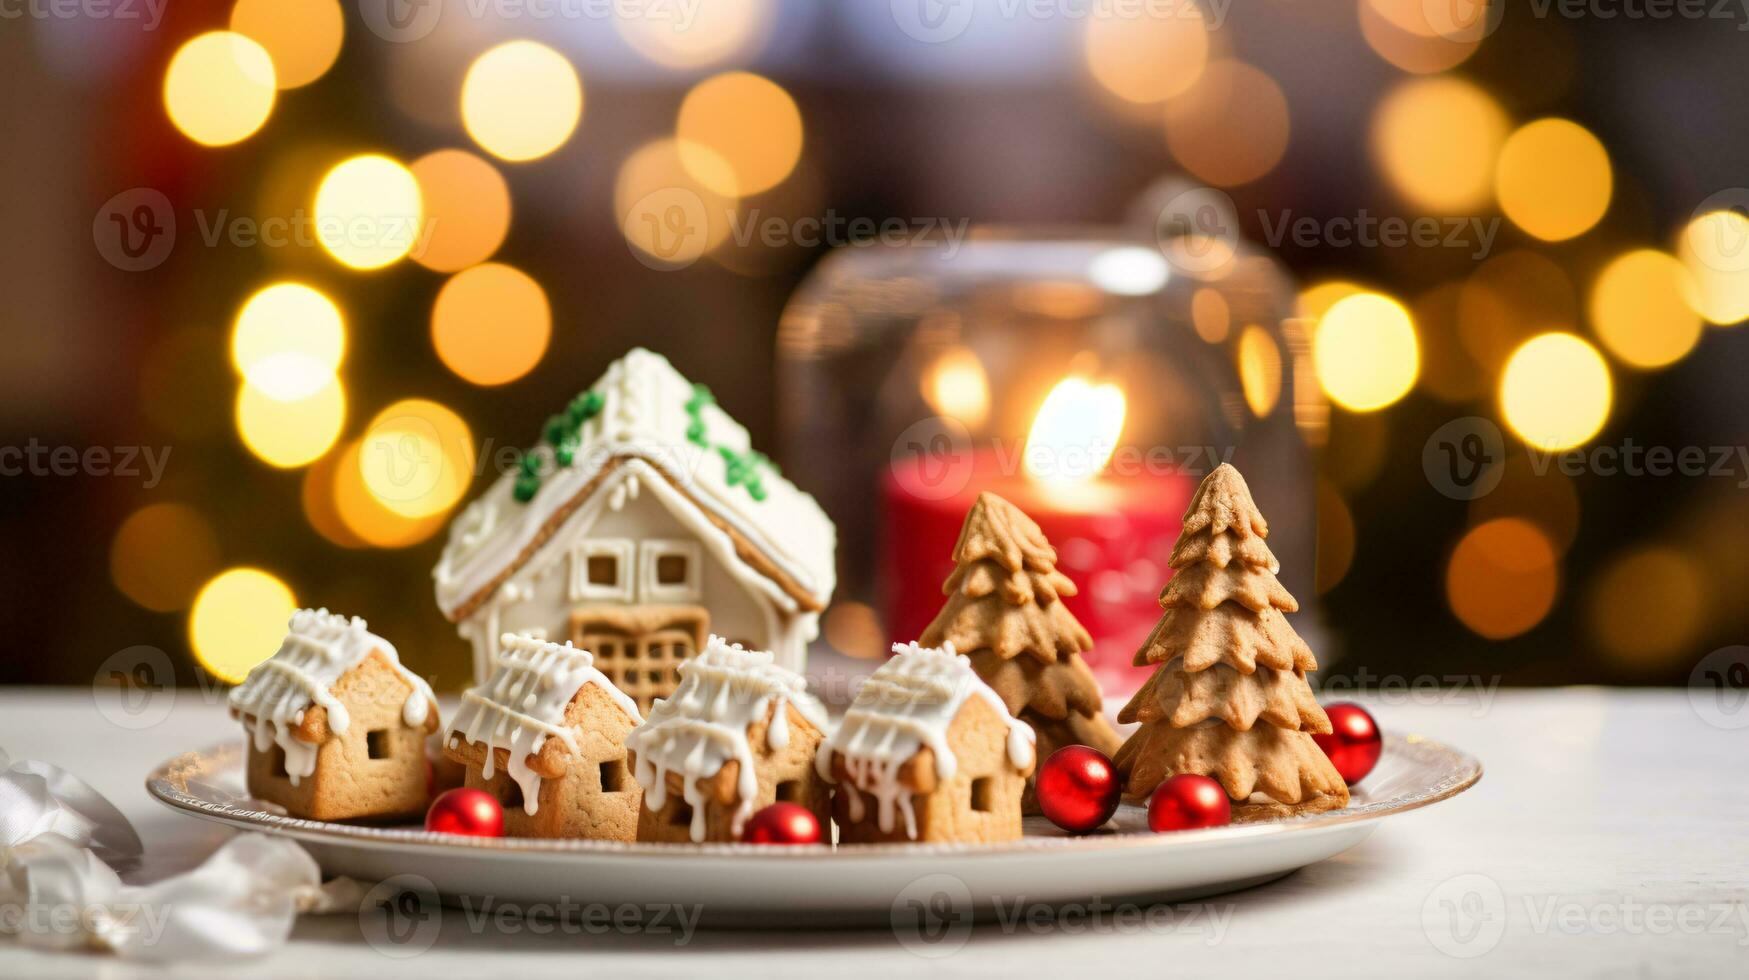 ai generative Christmas gingerbread houses and village close up shot of decorated gingerbread cookies photo